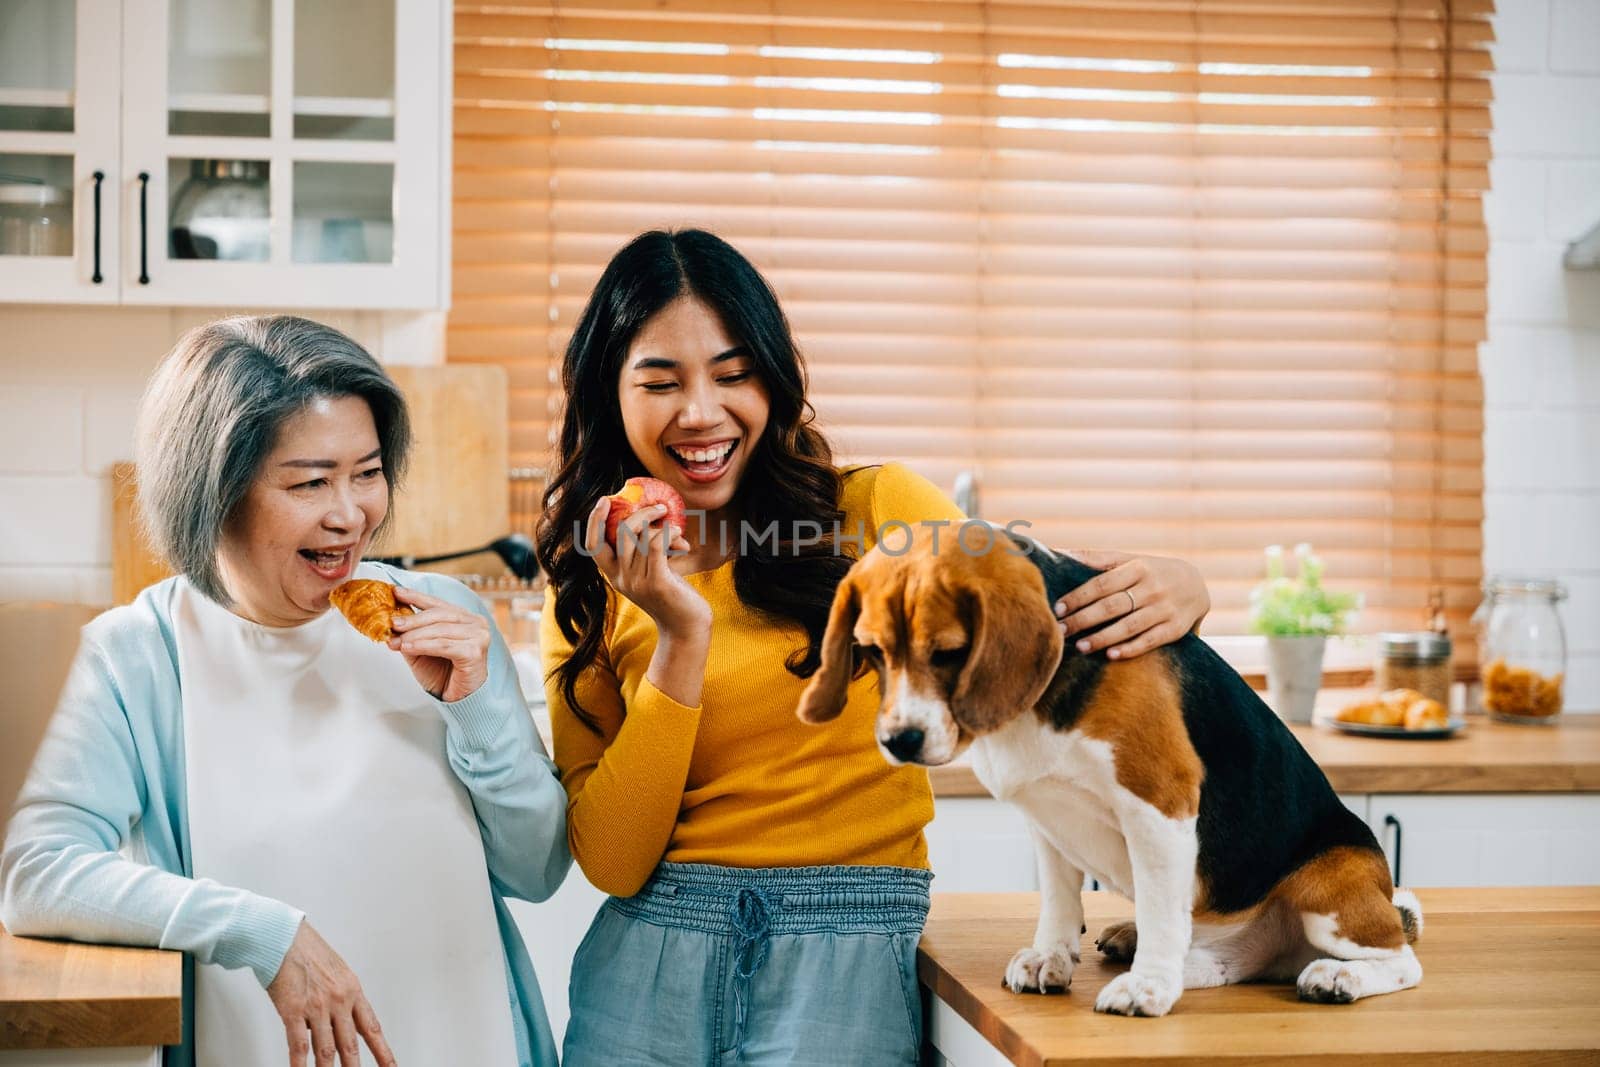 In the cozy kitchen of their home, a young Asian woman, her mother, and their beagle dog enjoy quality time together. This image embodies the concept of family, fun, and pet happiness. by Sorapop